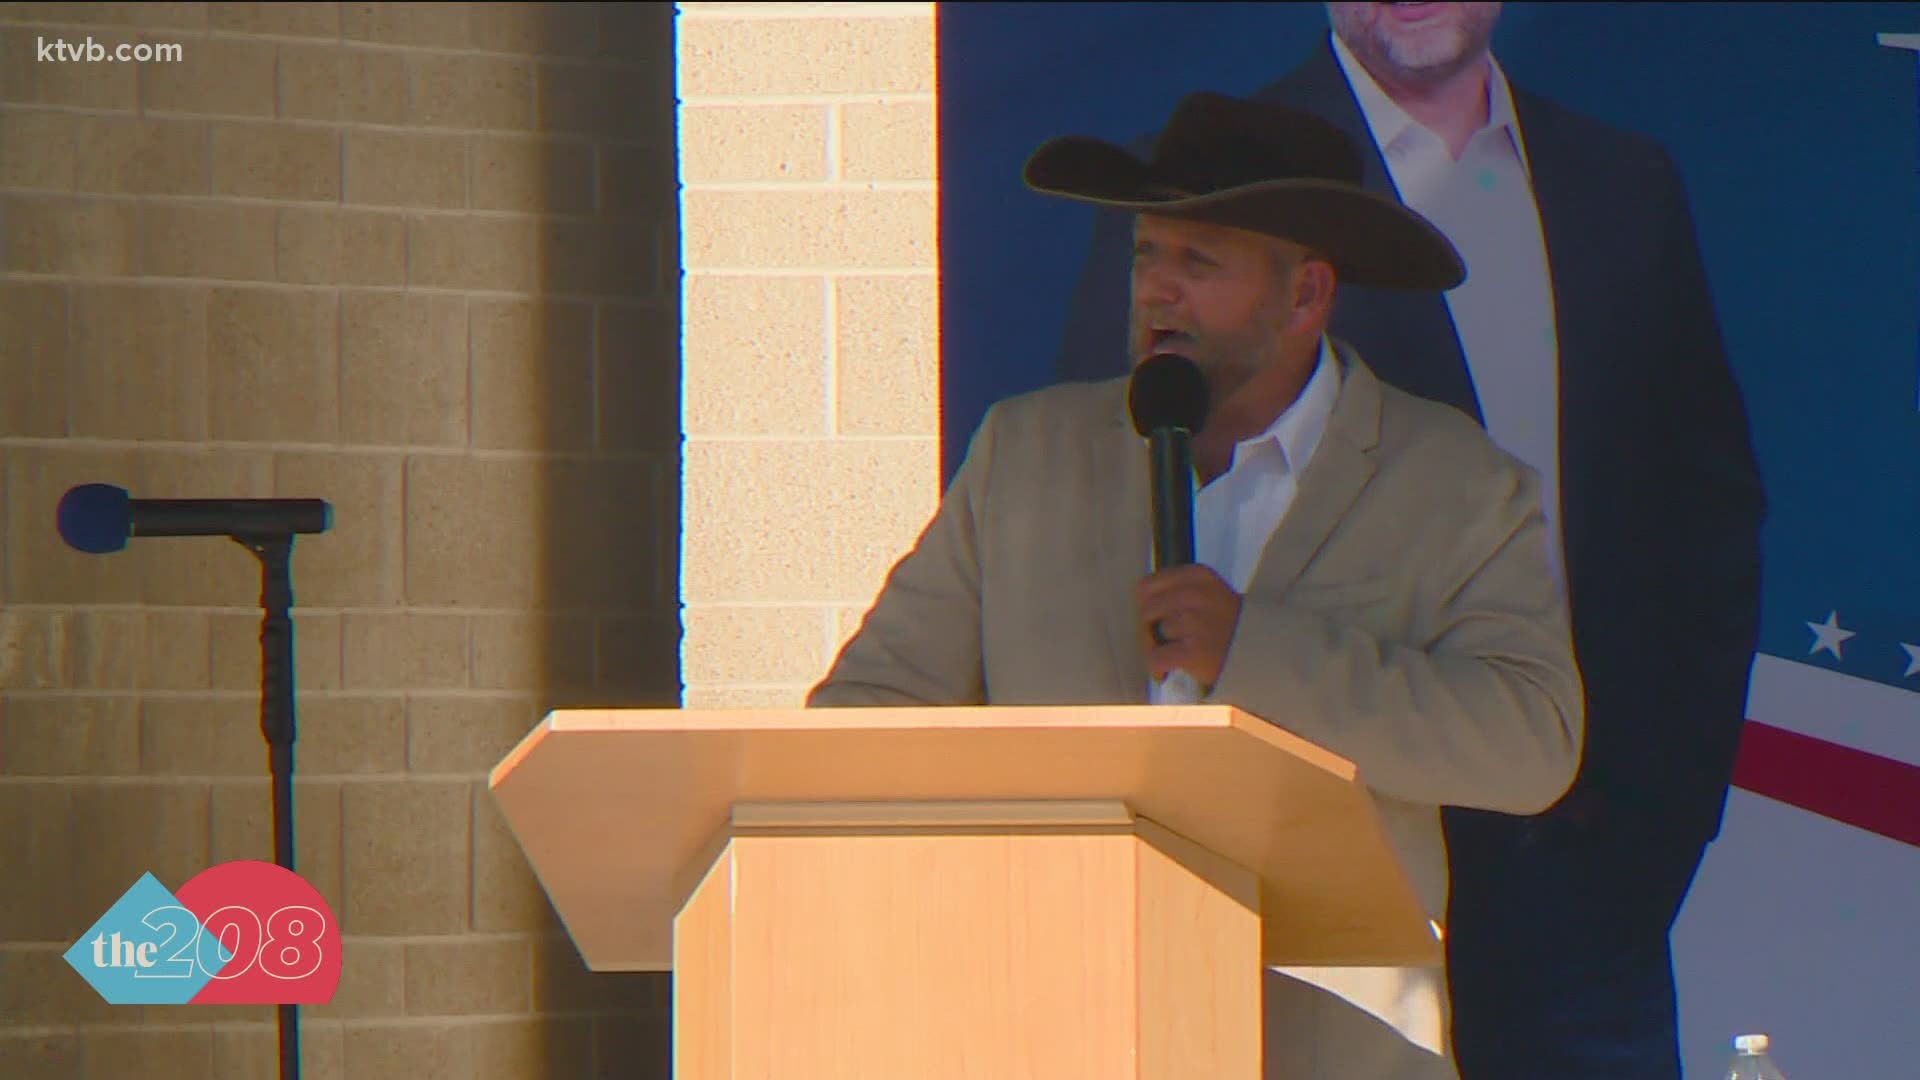 "I’m running for Governor because I’m sick and tired of all of this political garbage just like you are," Bundy said in a video on his campaign website.